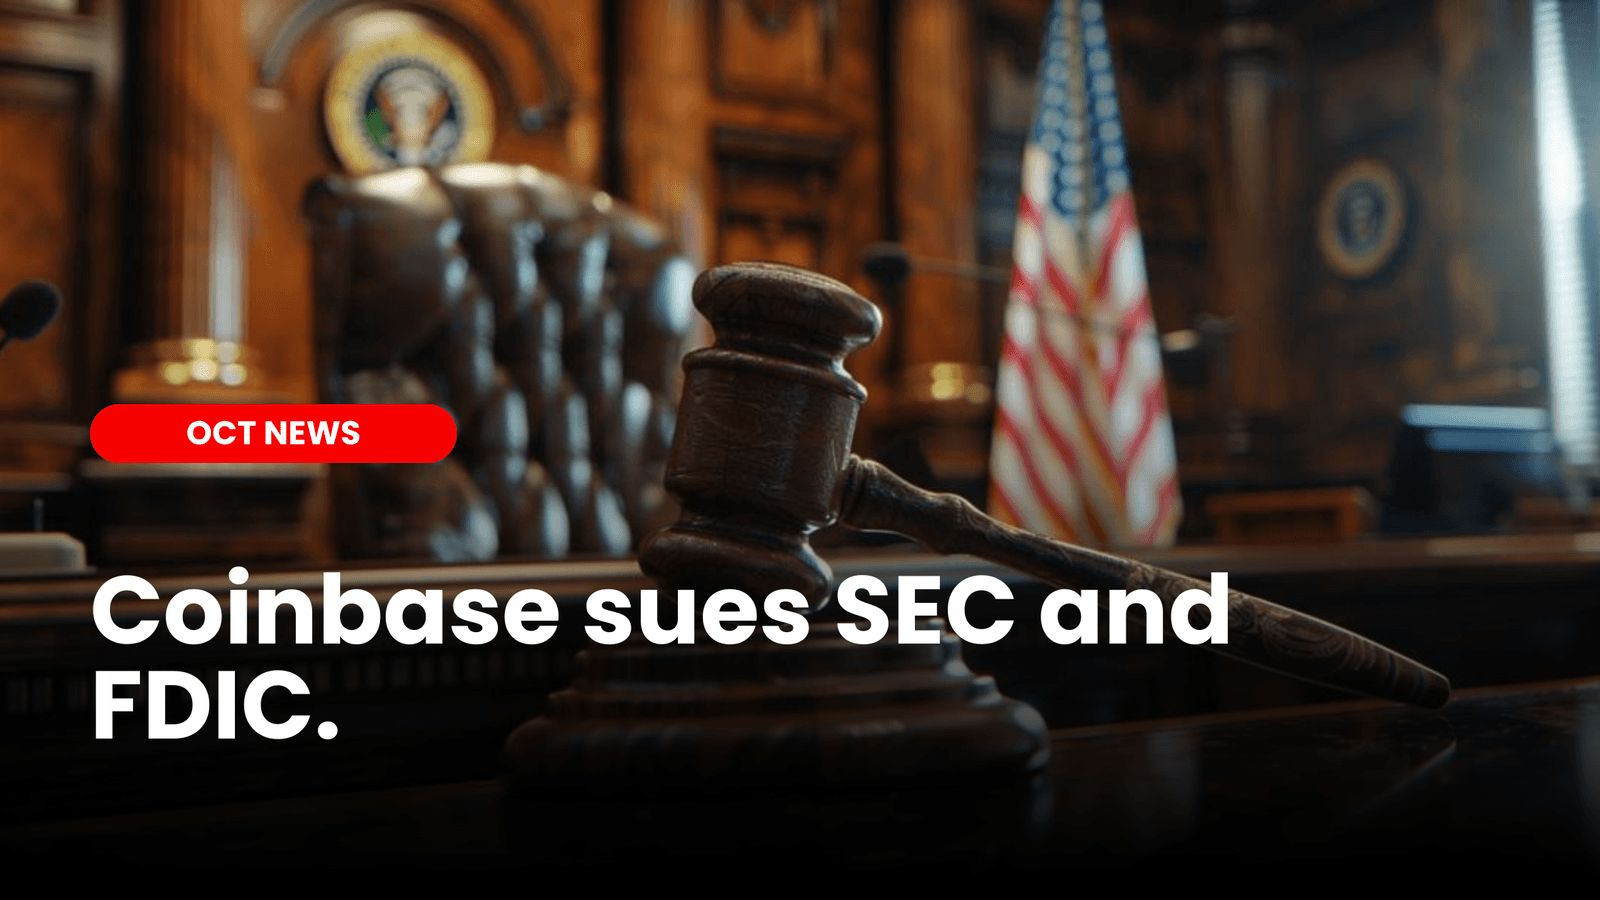 Coinbase sues the SEC and FDIC